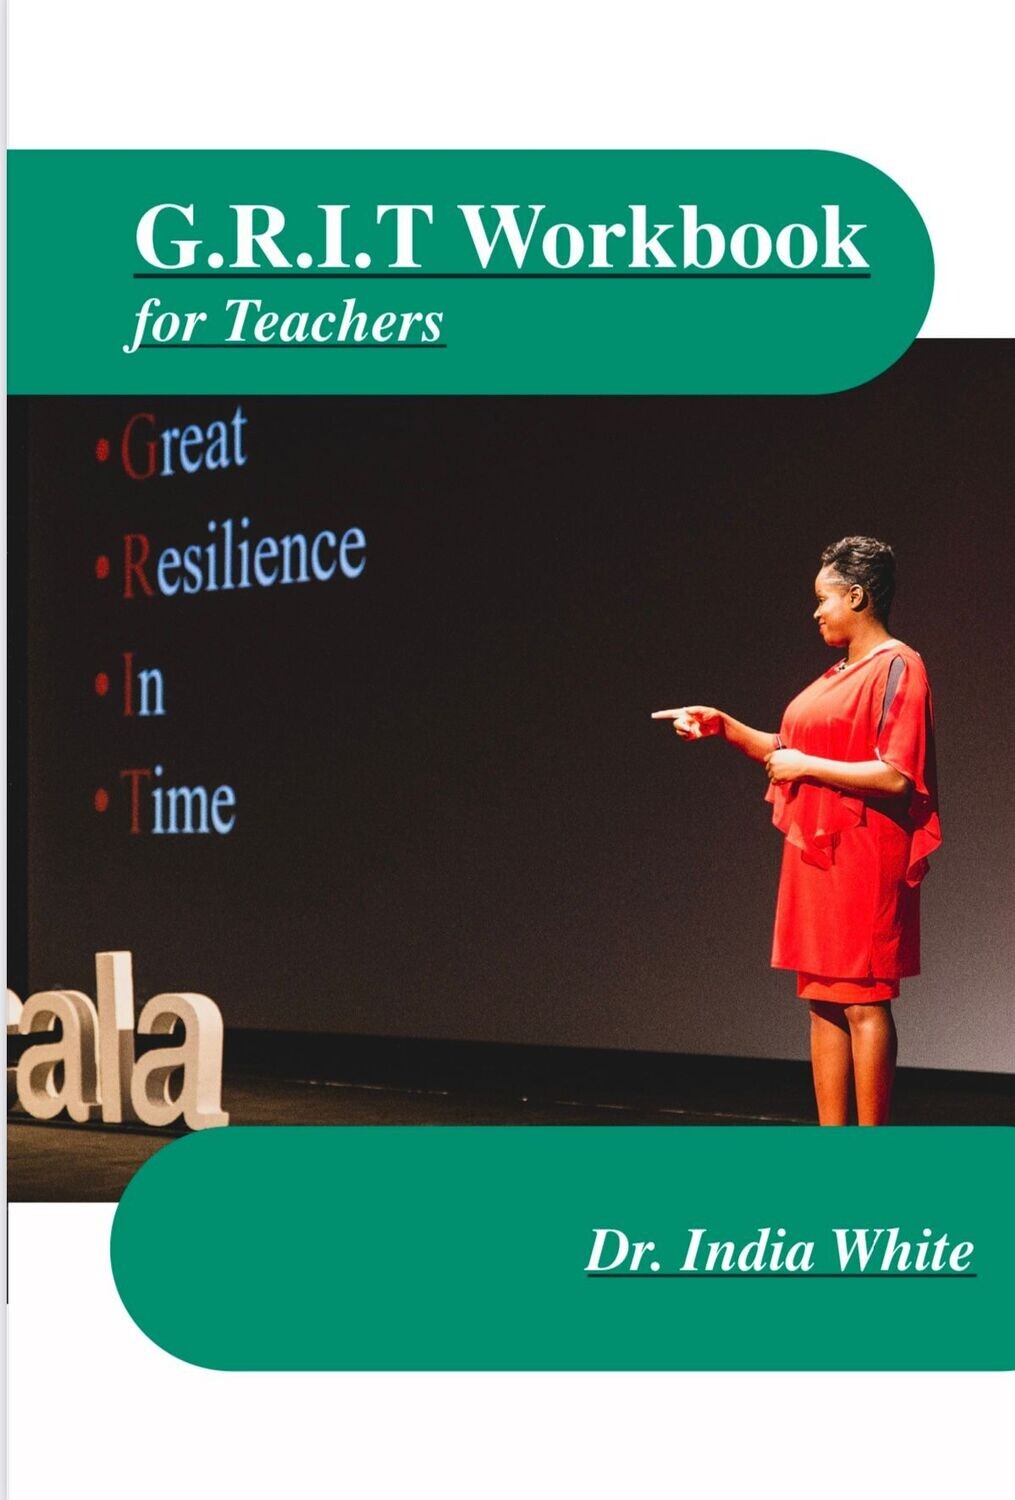 G.R.I.T. Master Class with Dr. India White: For Teachers!